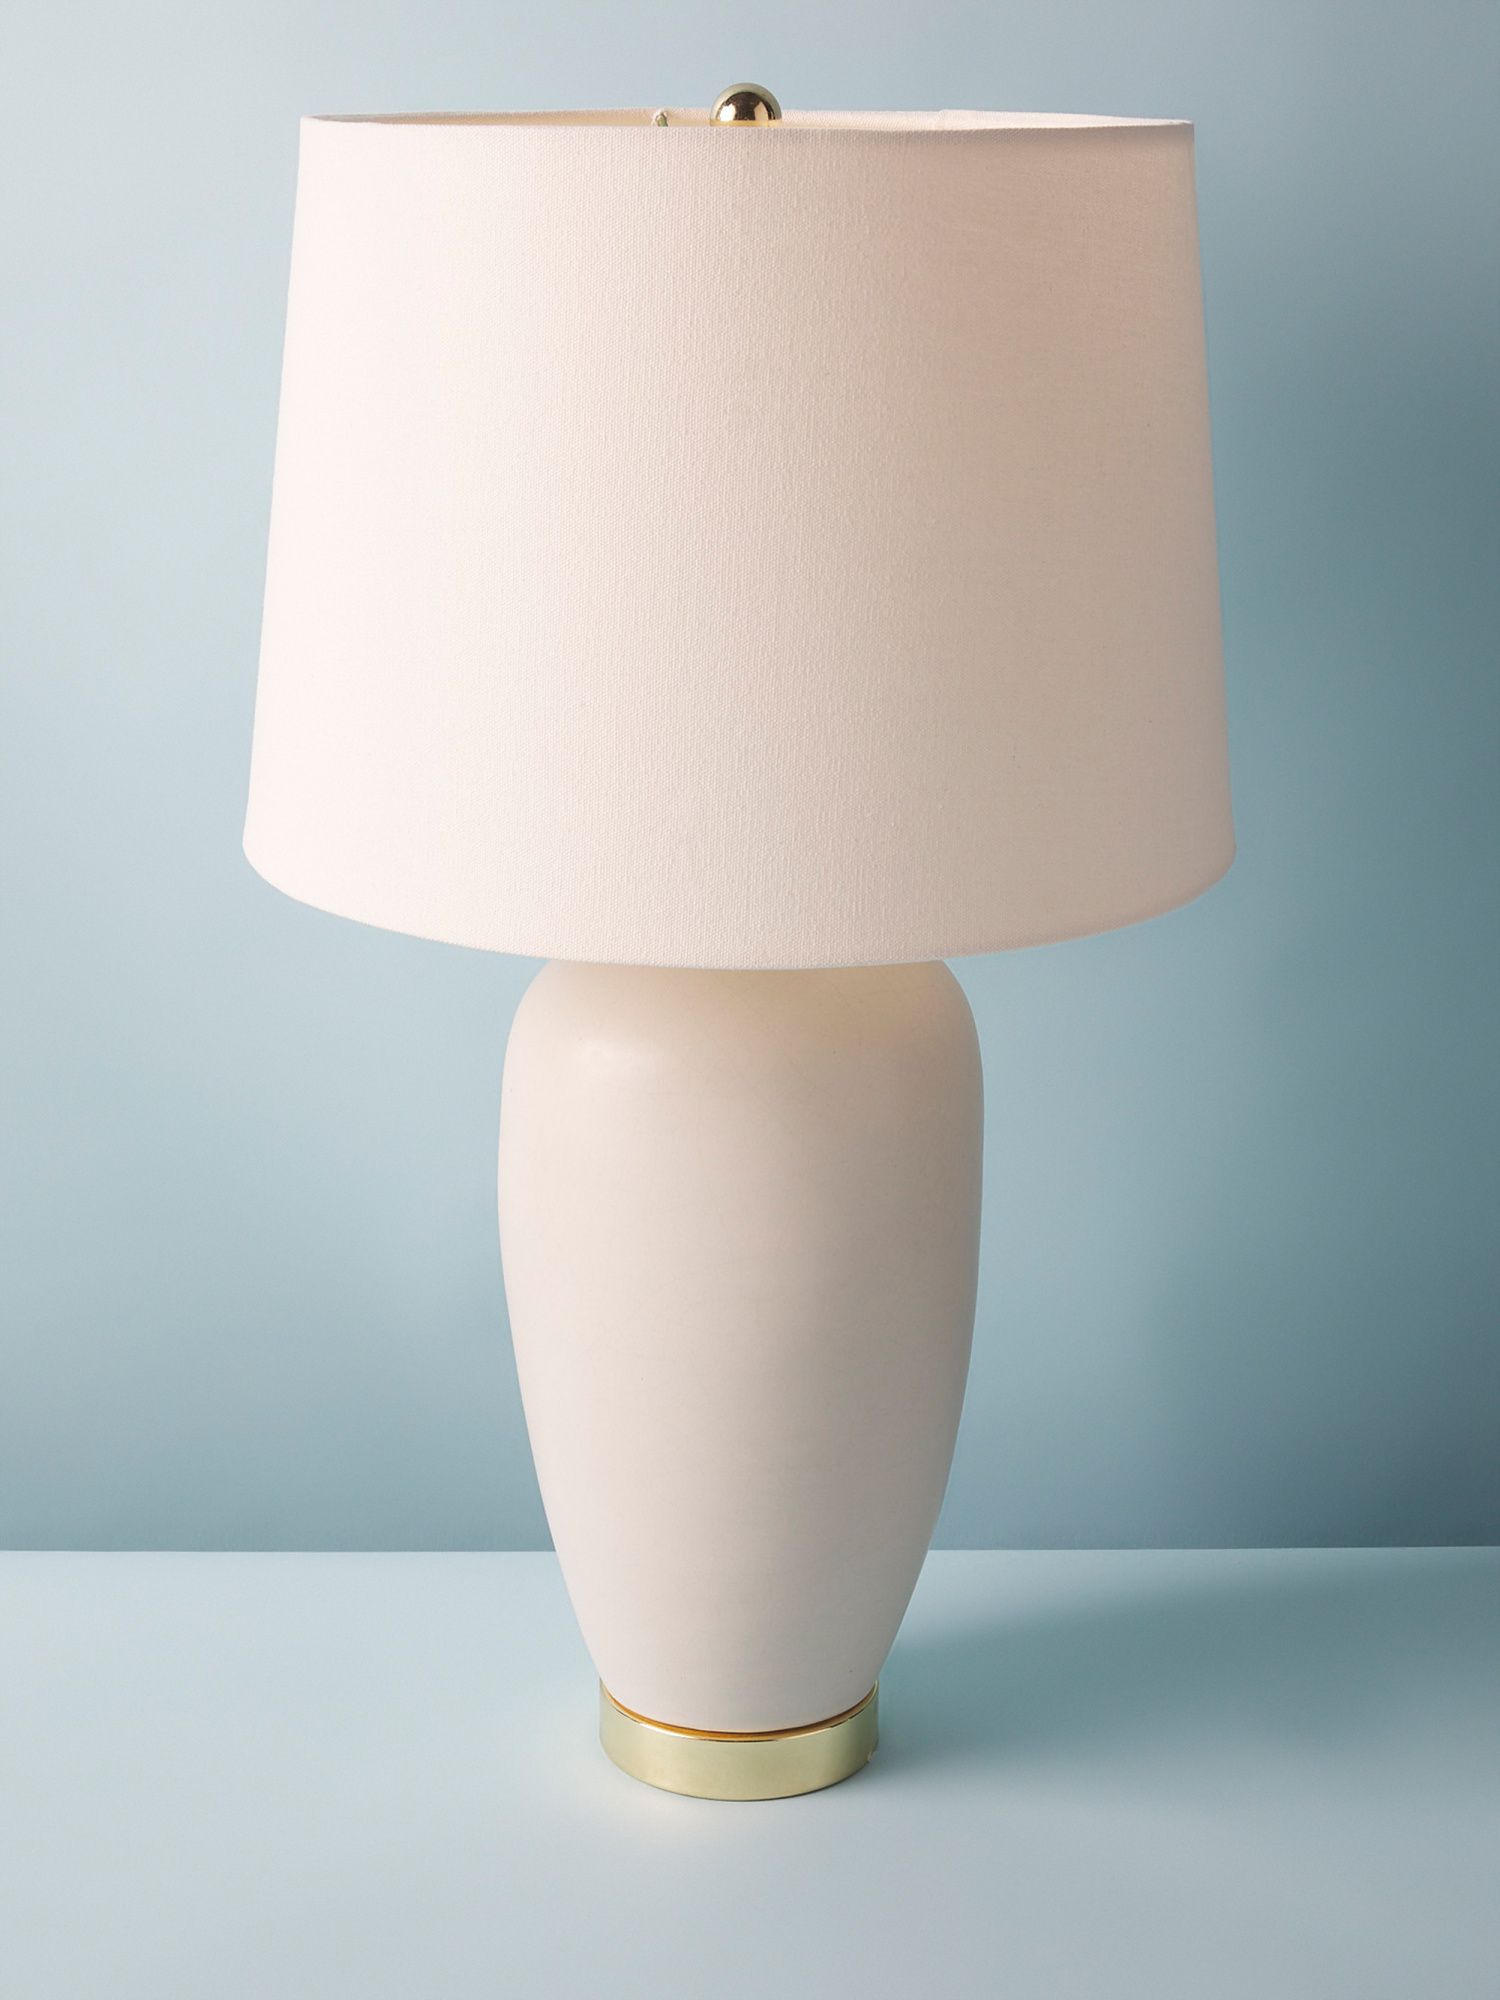 26in Laine Table Lamp | Table Lamps | HomeGoods | HomeGoods